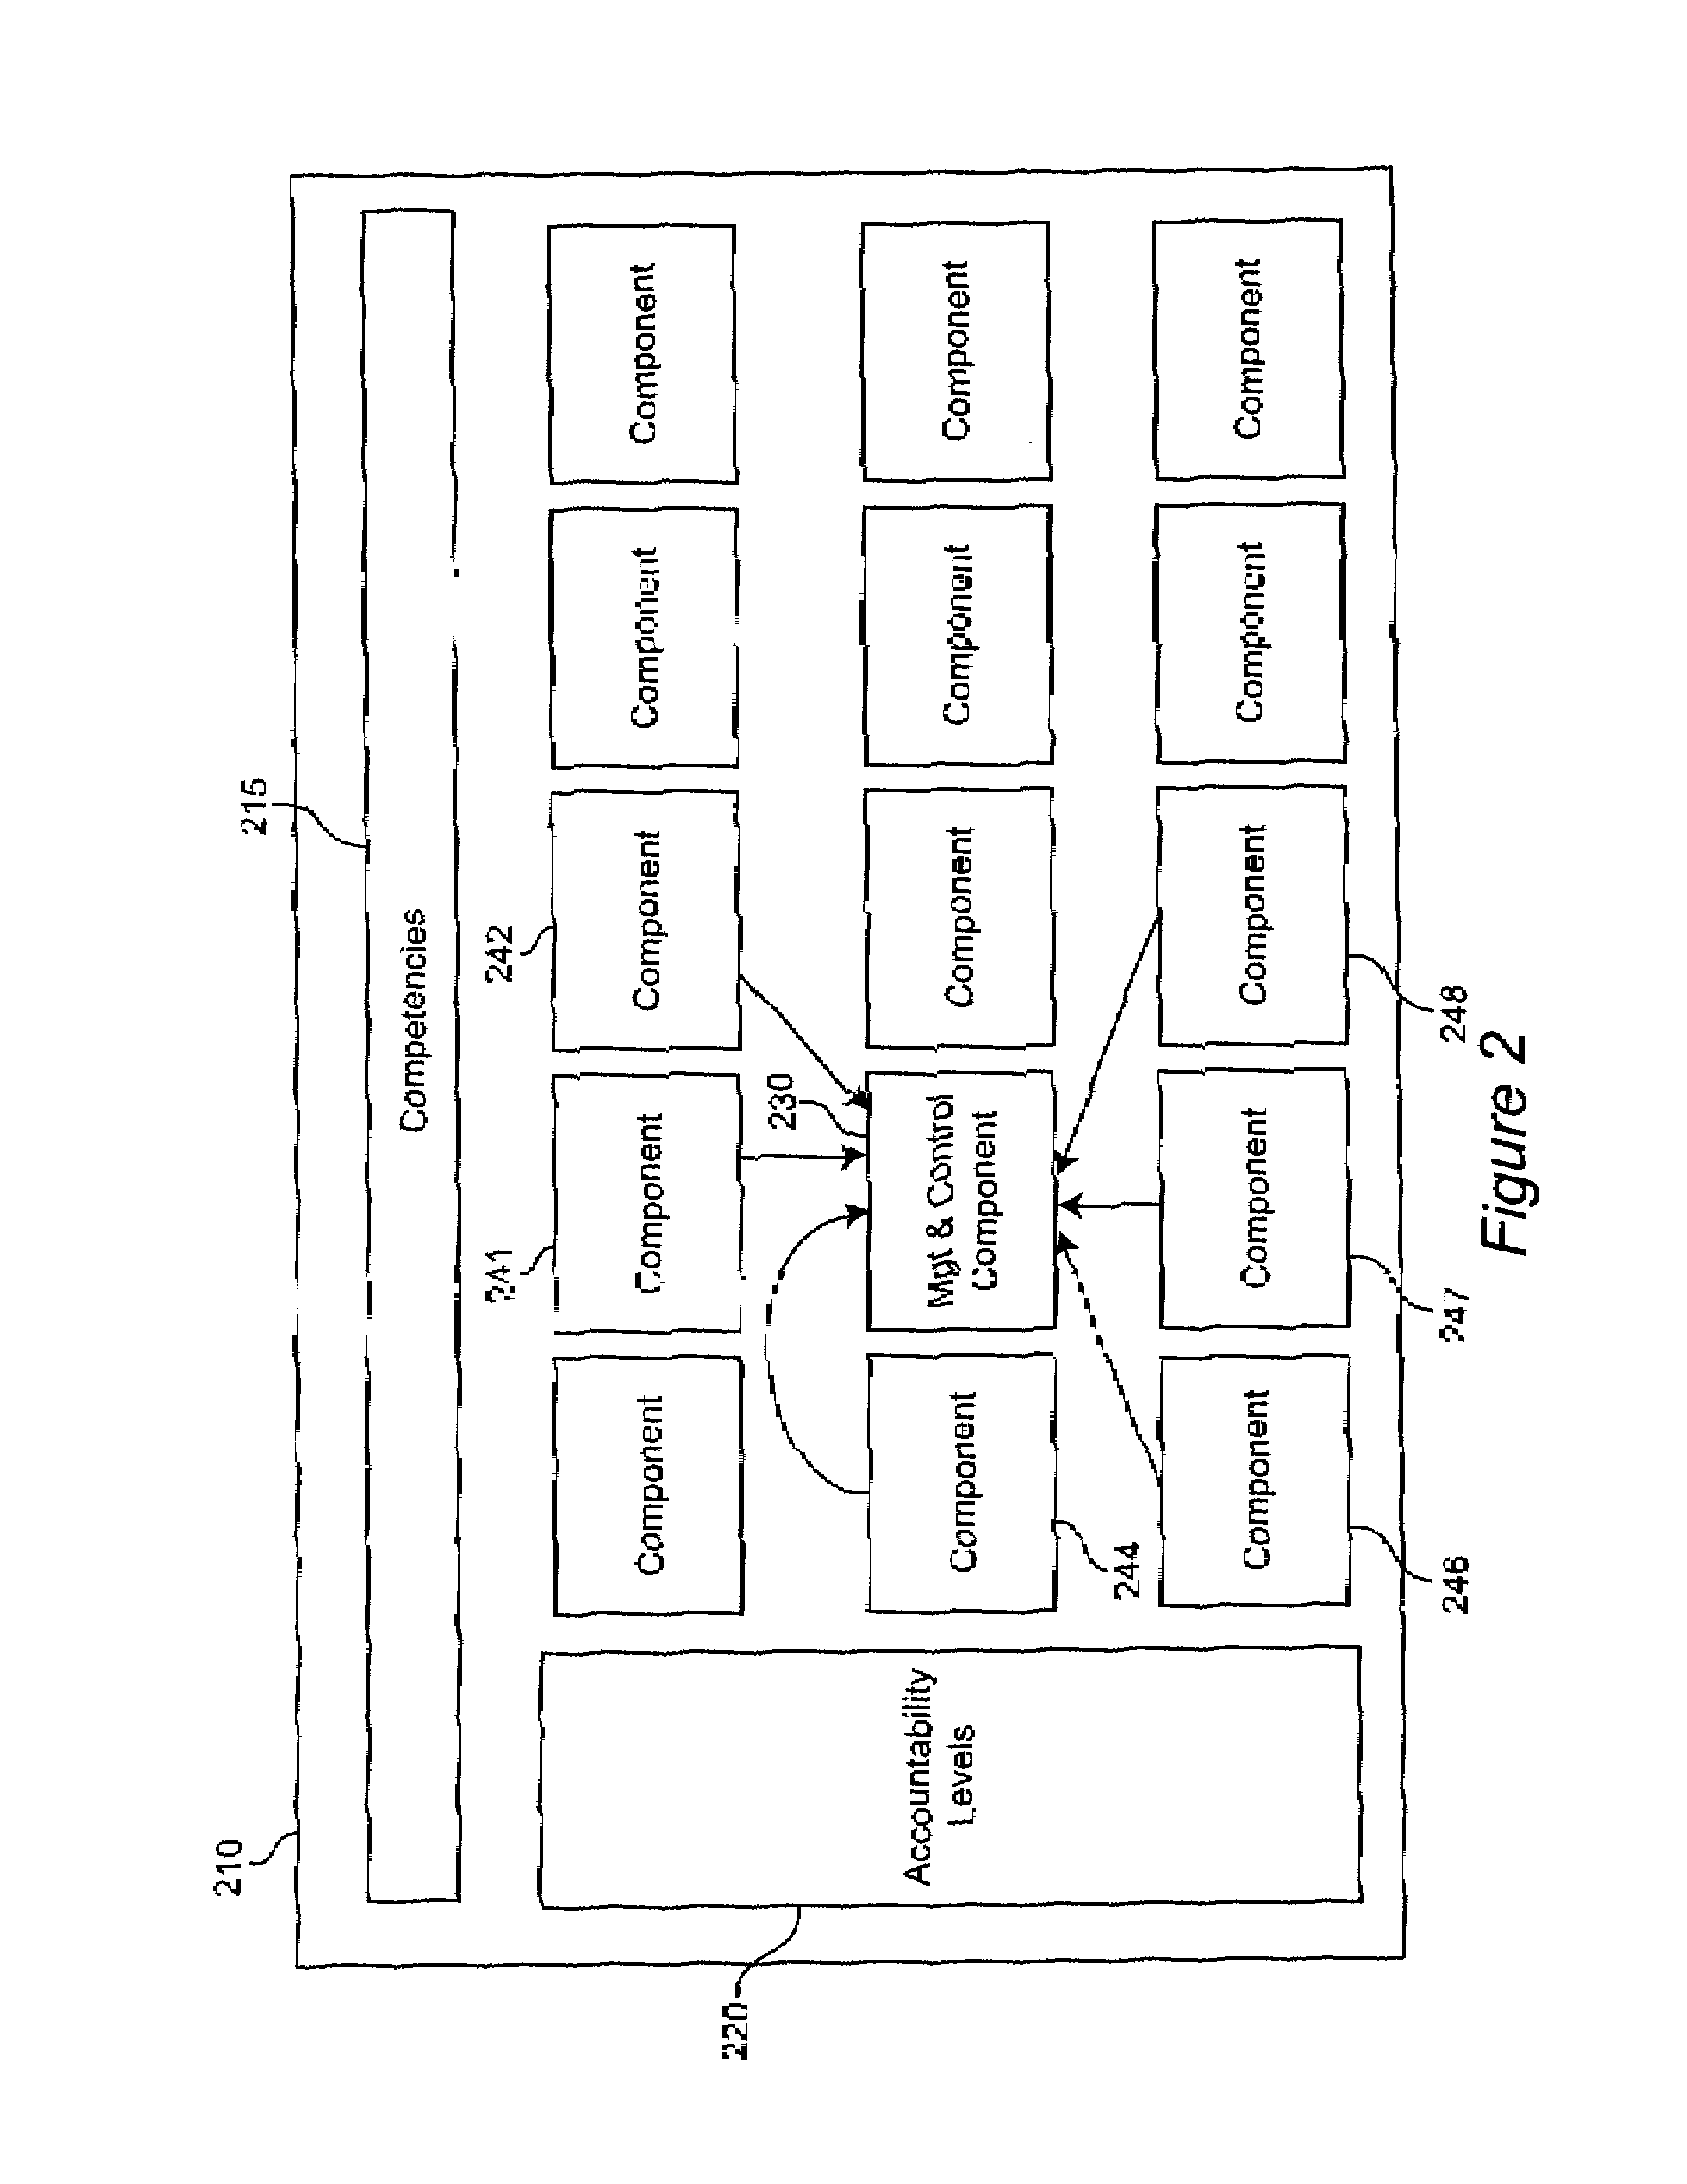 System and method for using a component business model to manage an enterprise